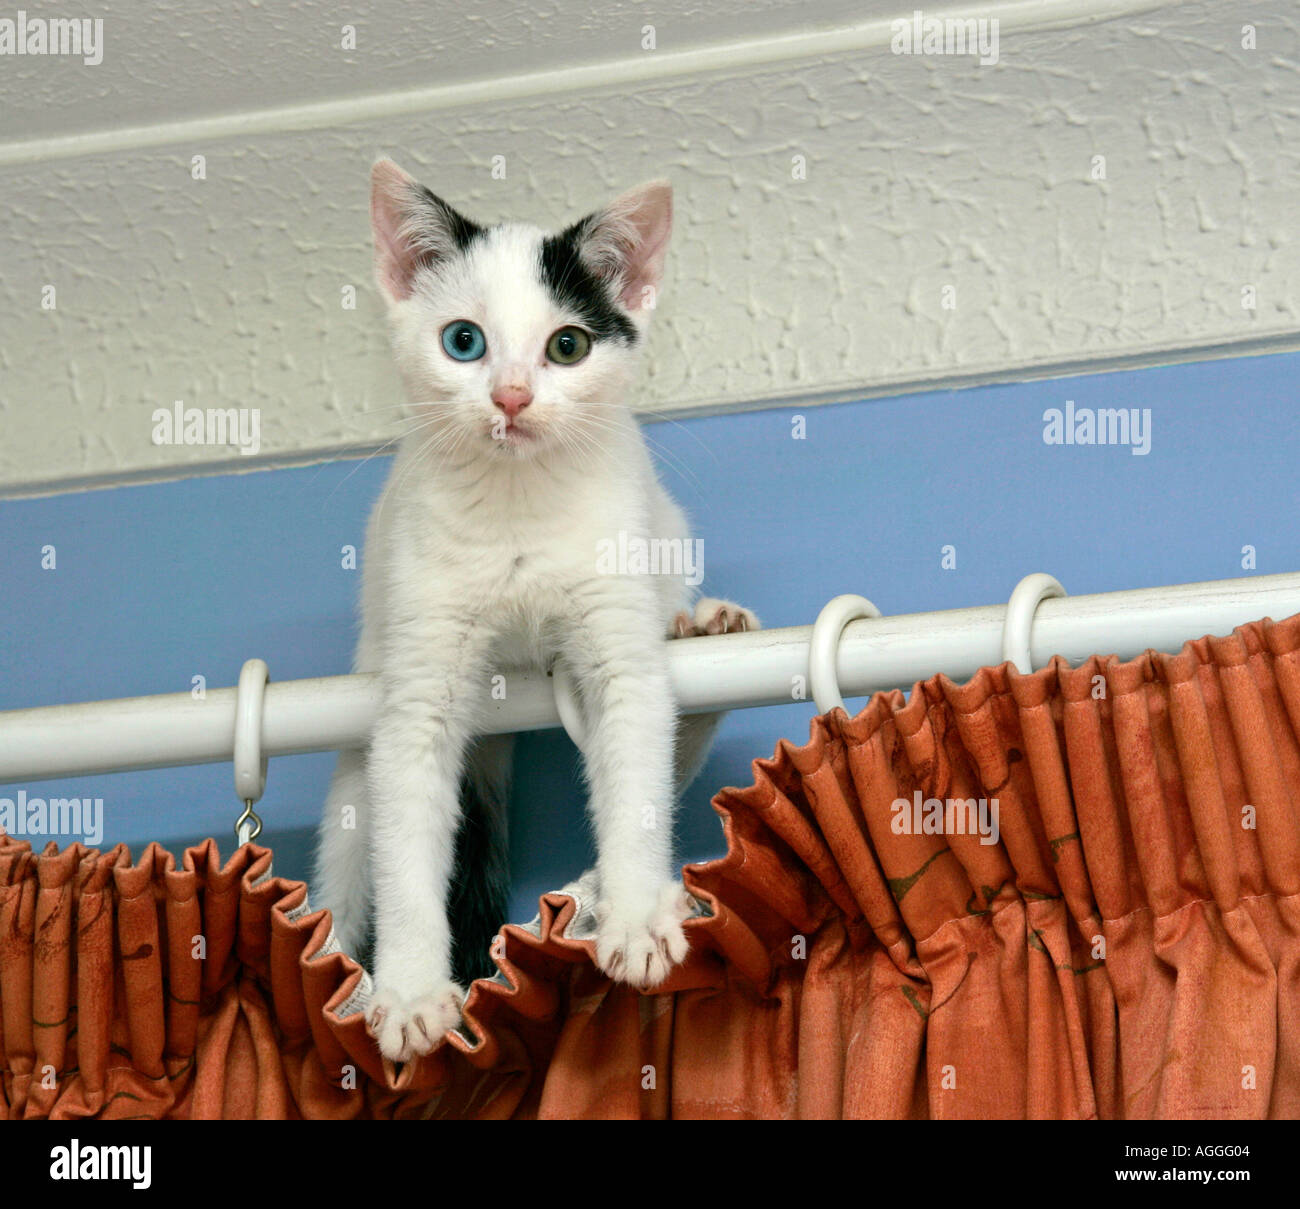 Young black and white kitten(Felis catus) pleased with herself sitting on curtain pole after climbing up the curtains Stock Photo